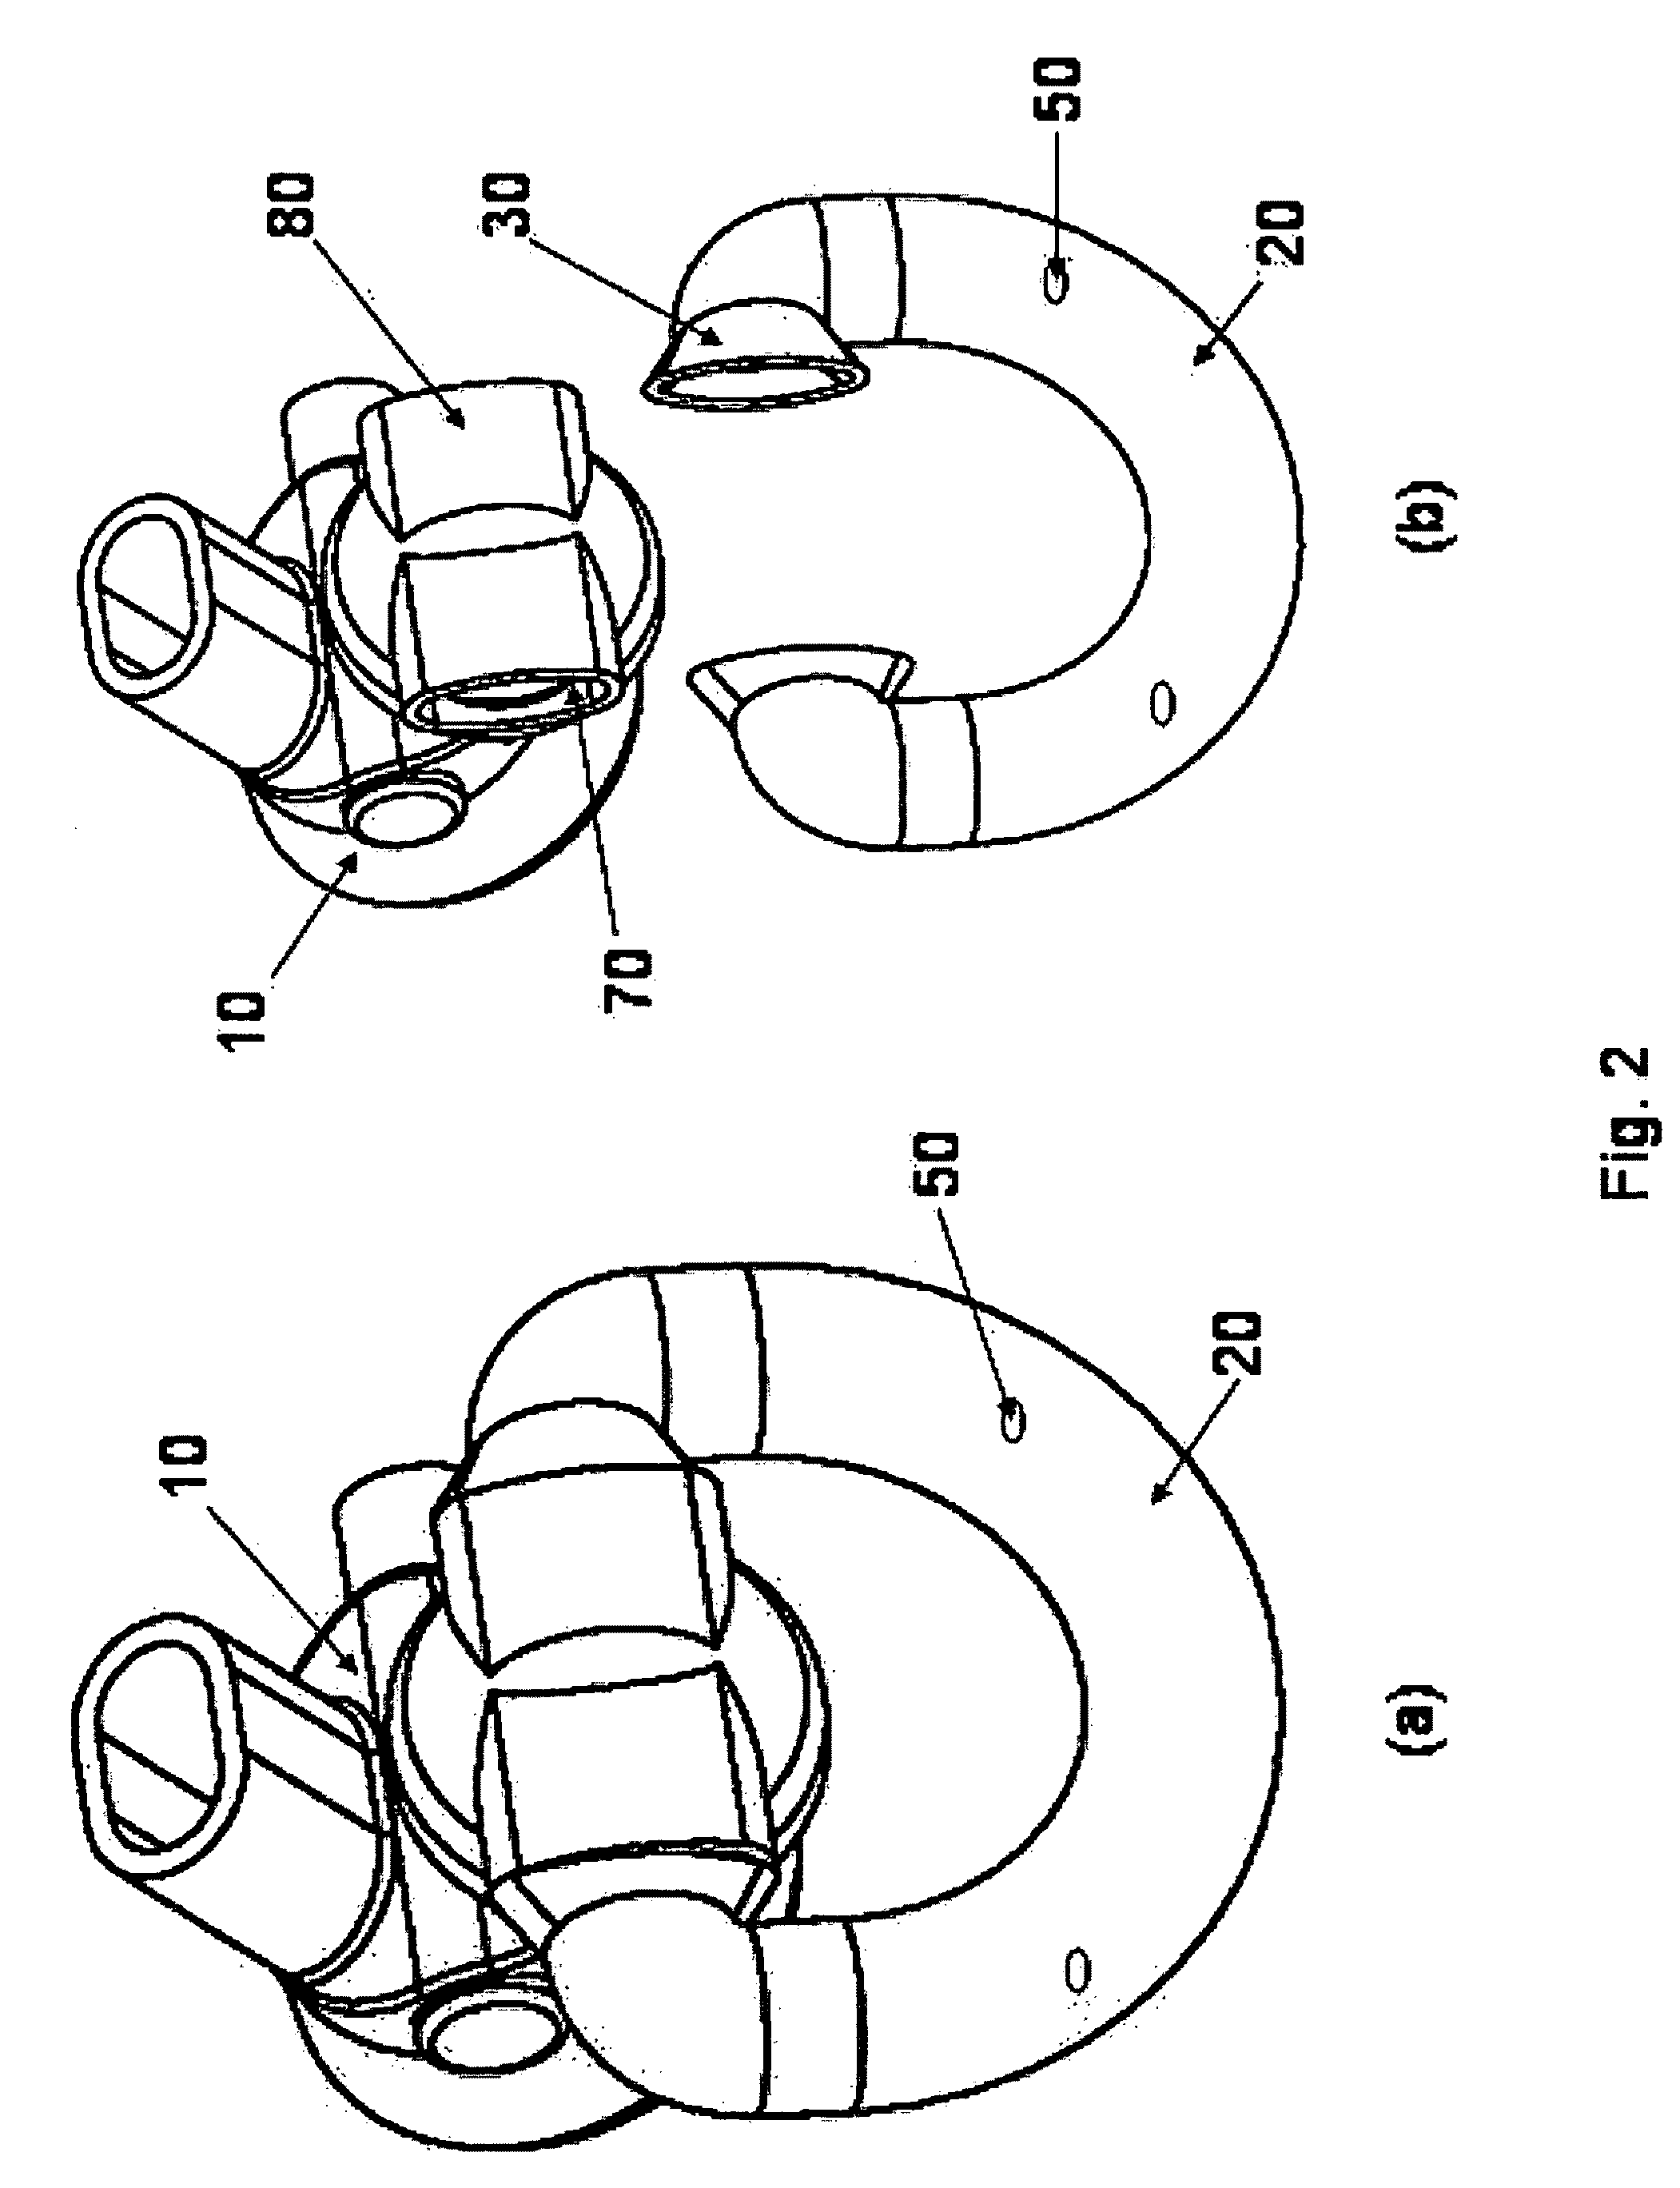 Method and apparatus for altering and/or minimizing underwater noise